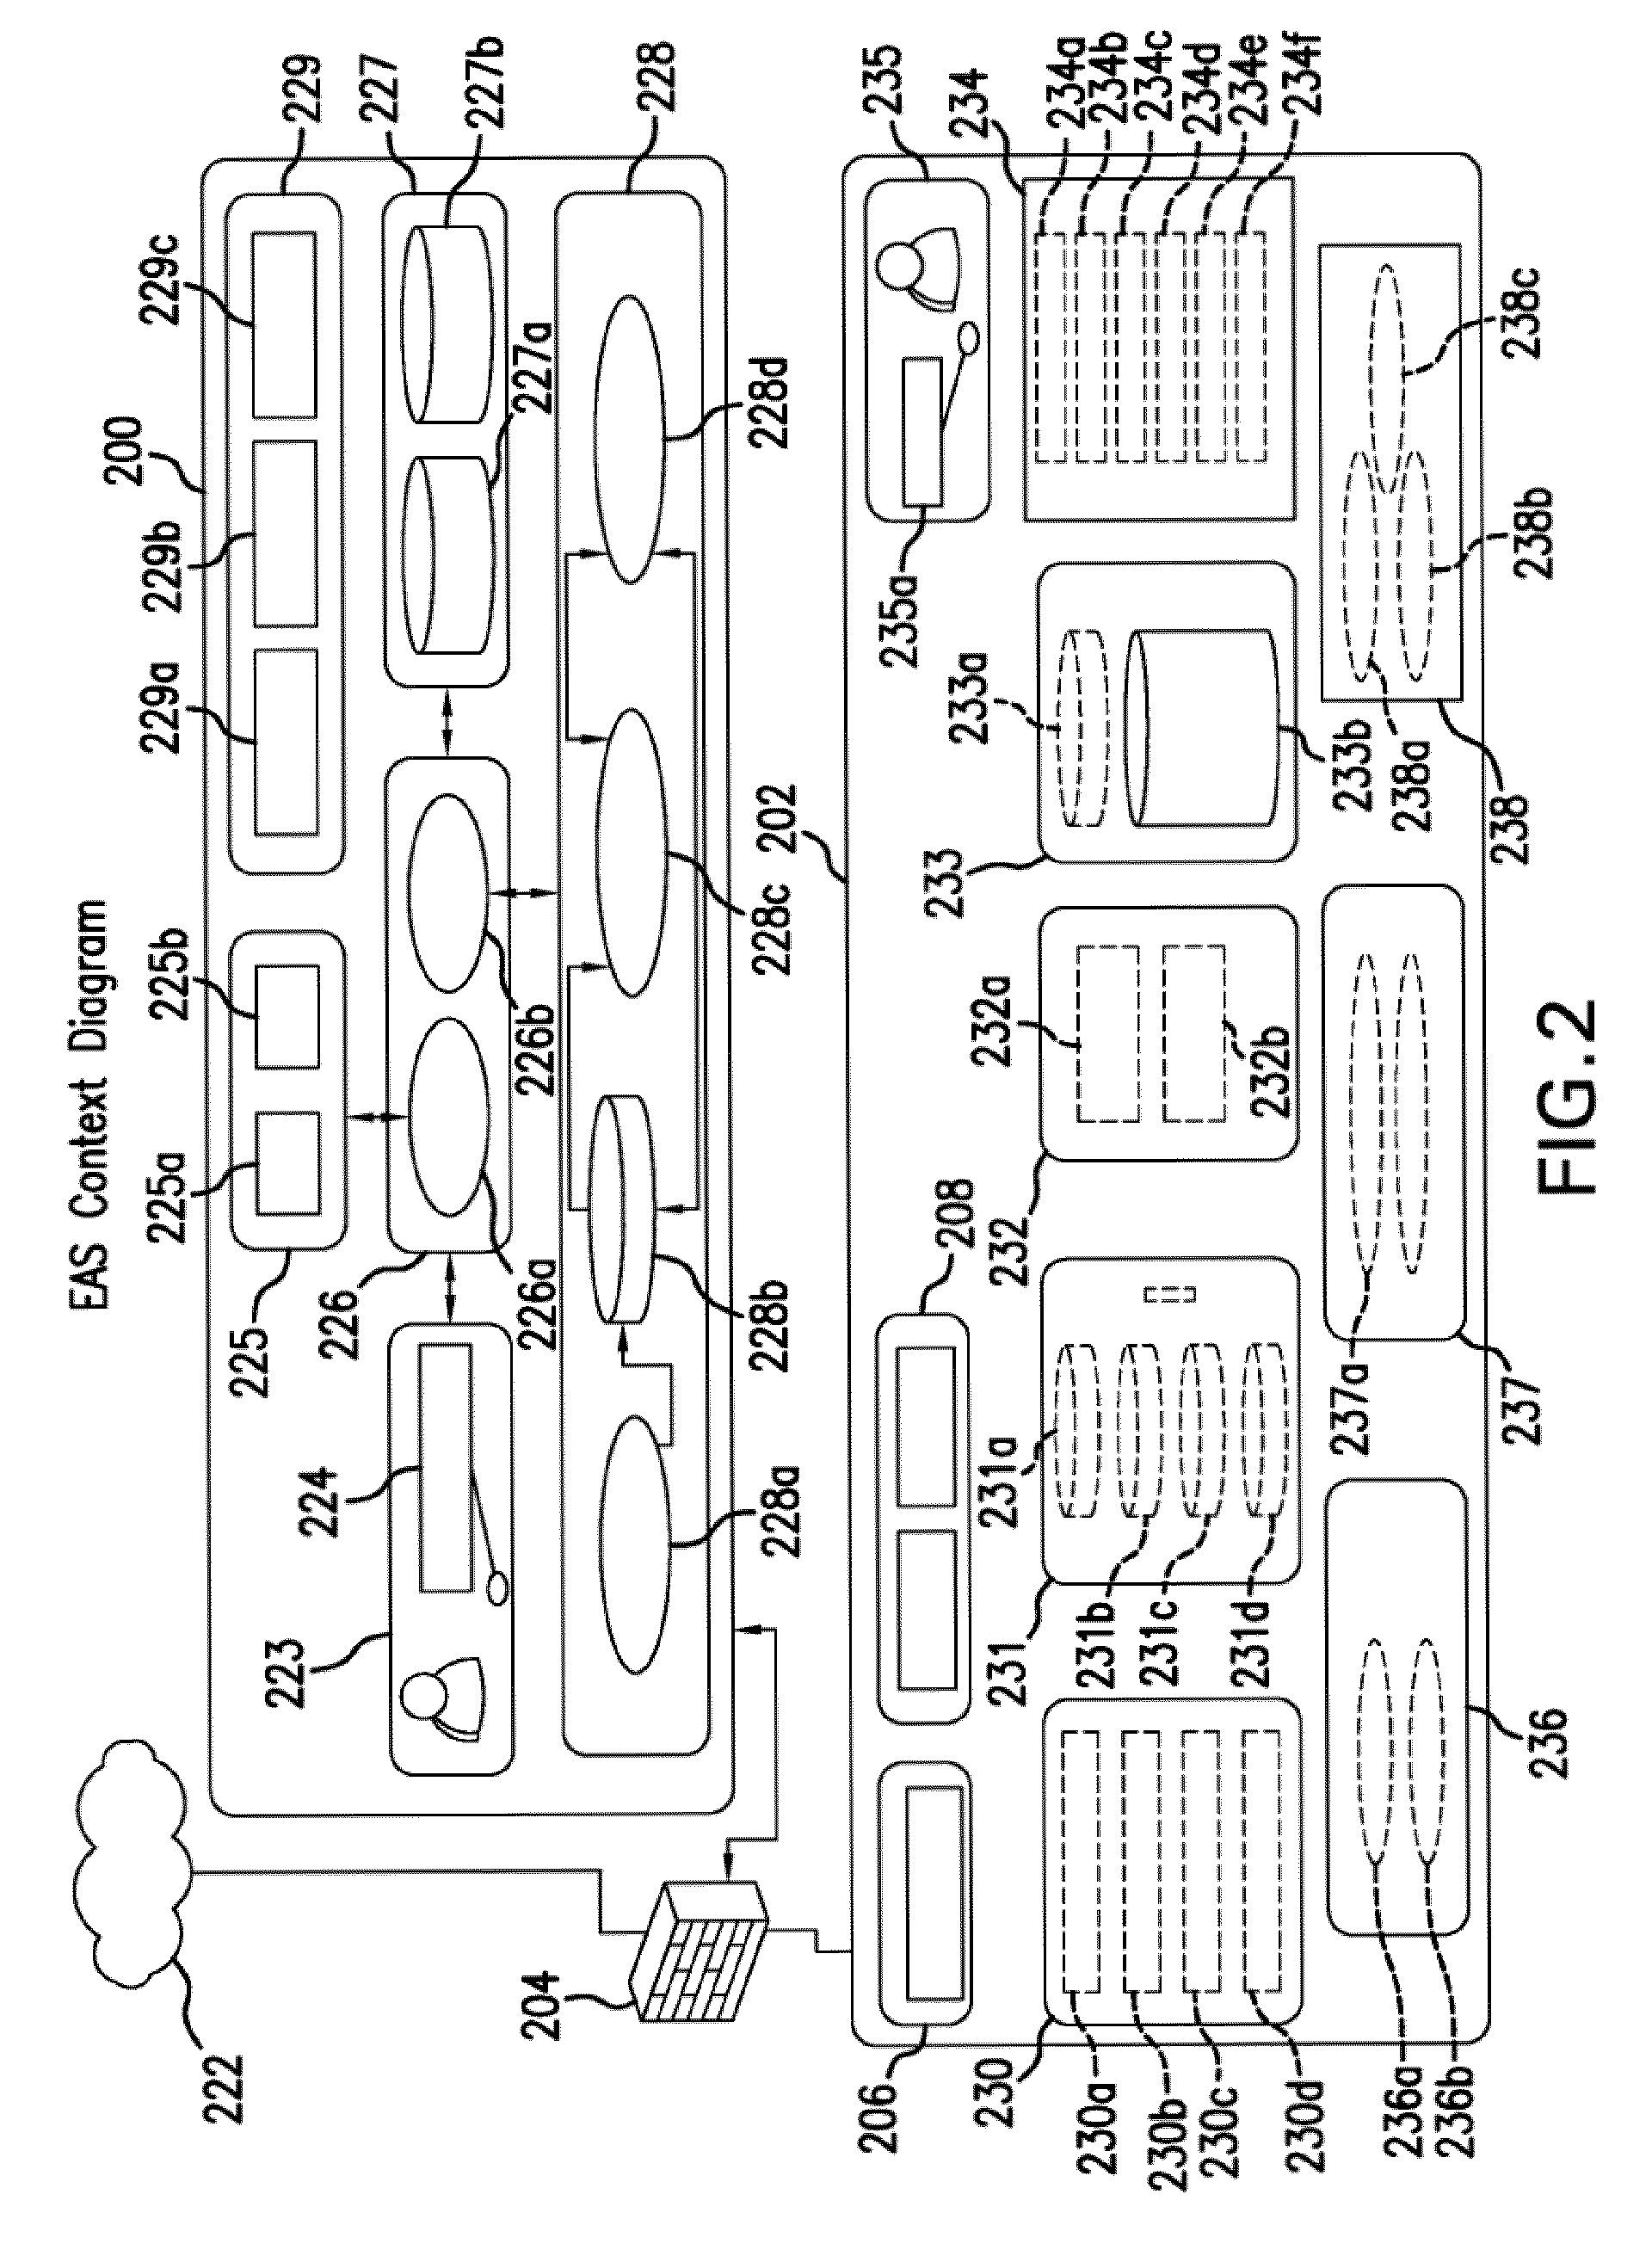 Networked gaming system with enterprise accounting methods and apparatus